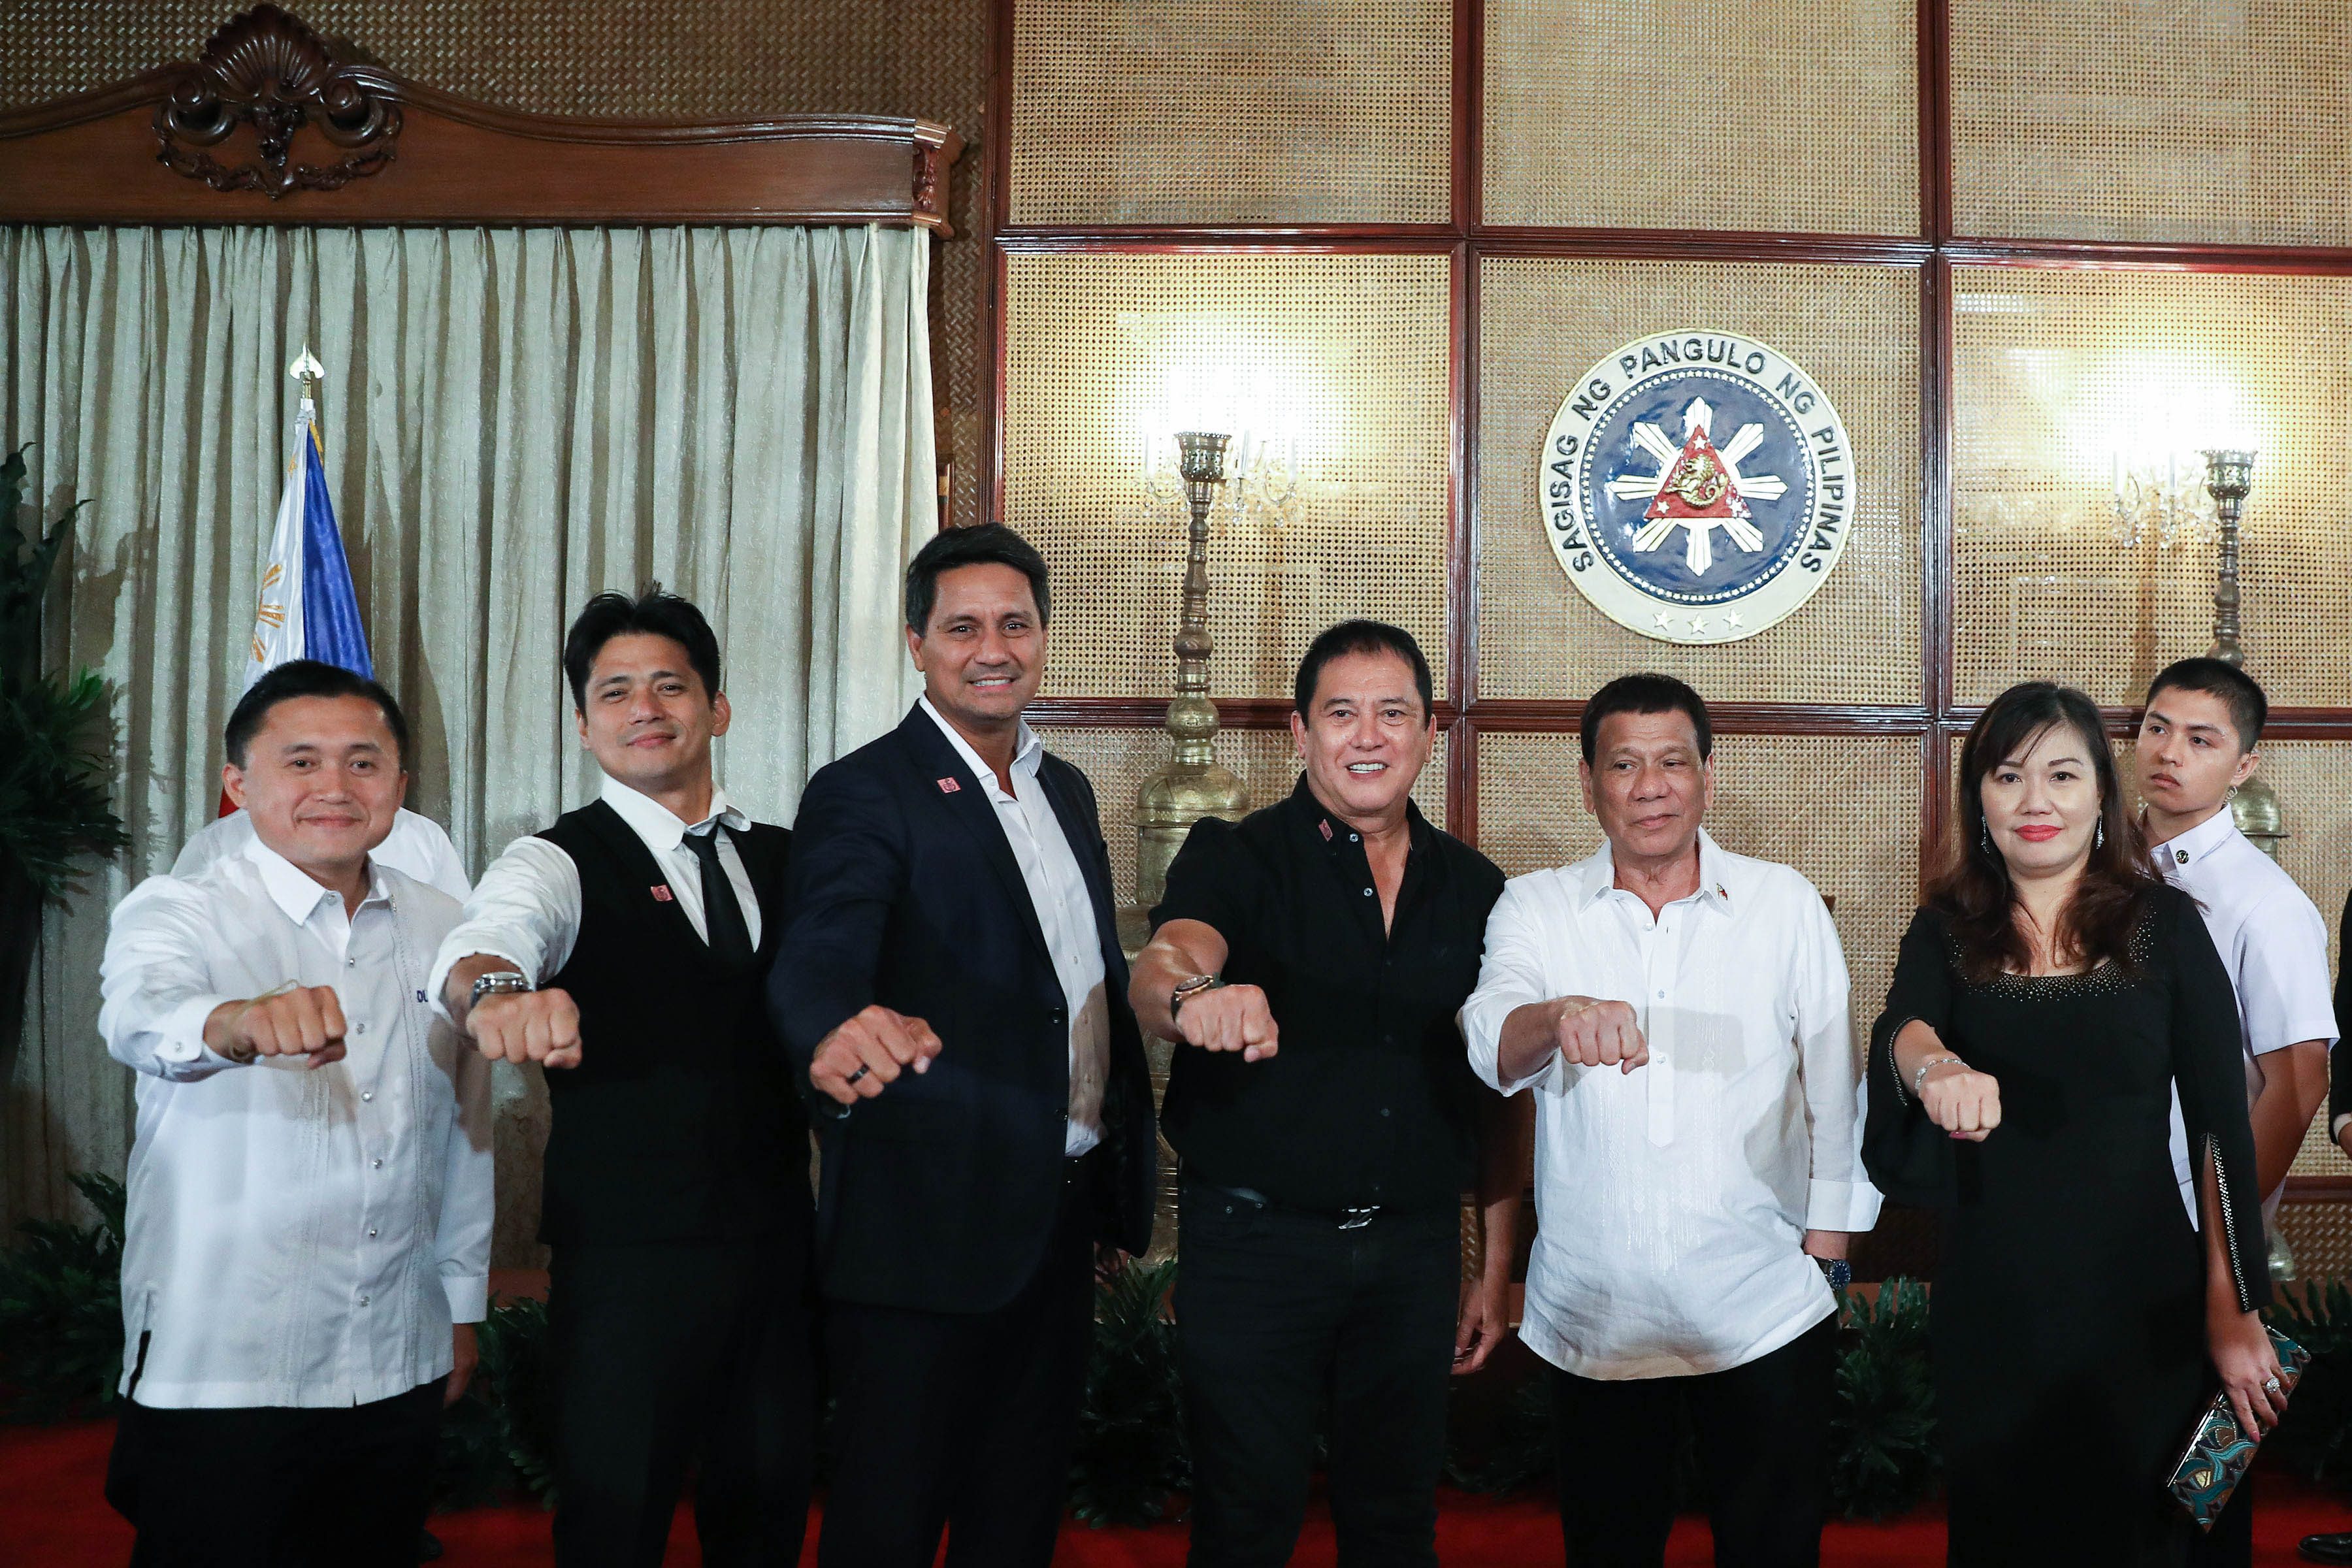 President Rodrigo Roa Duterte and his long-time partner Cielito "Honeylet" Avanceña strike the President's signature pose with the guests during a dinner hosted by the President at the Malacañan Palace on May 7, 2019. Valerie Escalera/Presidential Photo 